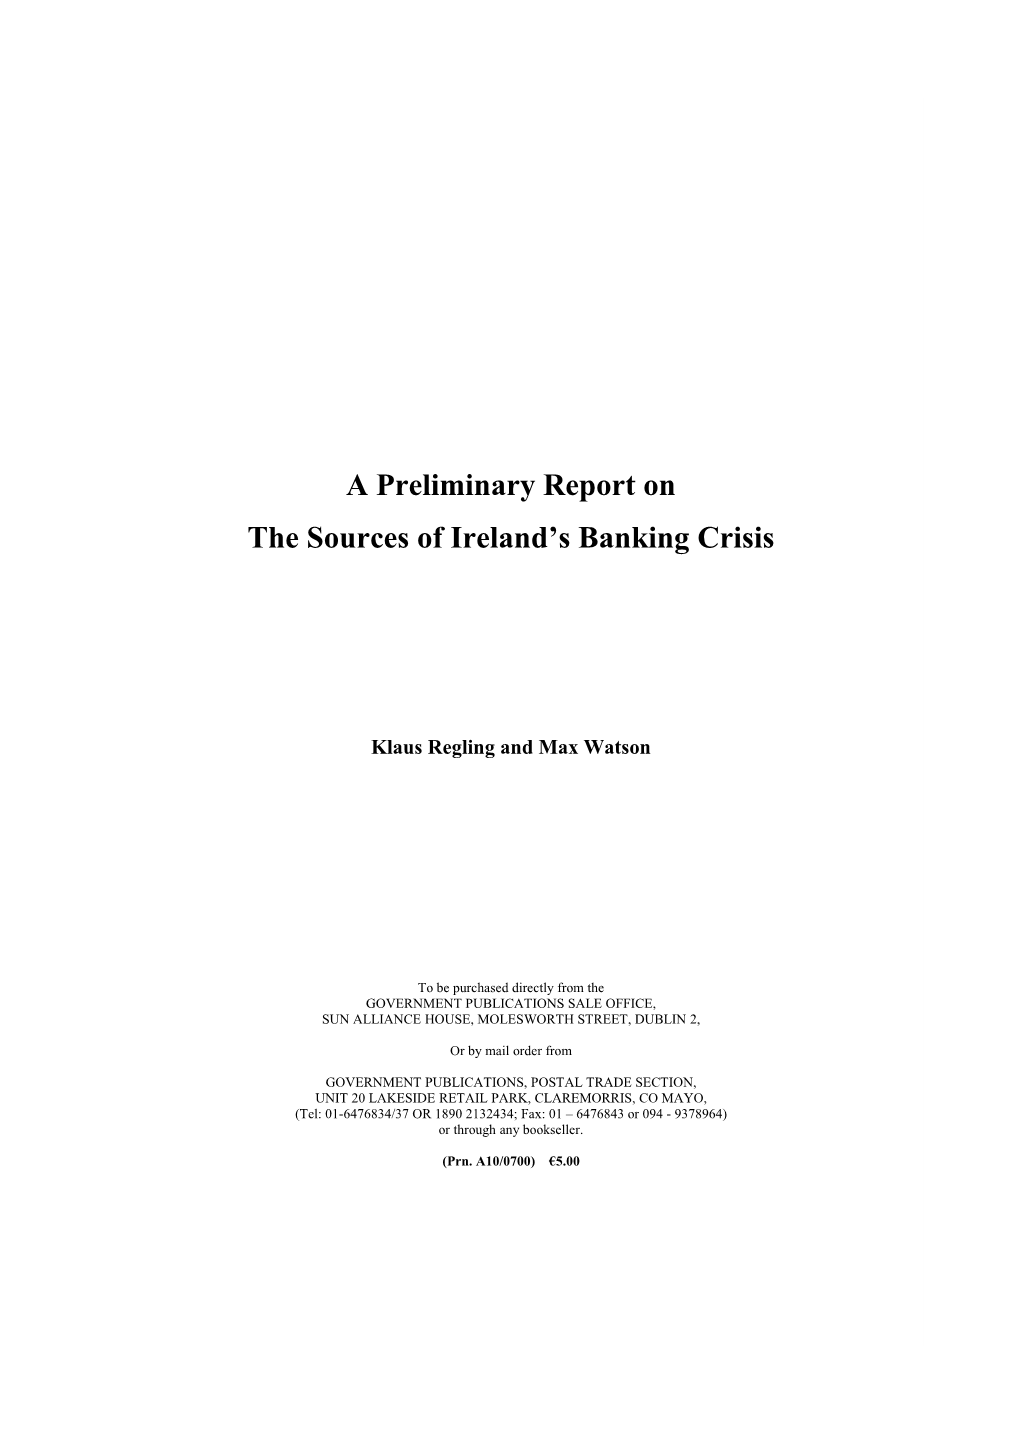 A Preliminary Report on the Sources of Ireland's Banking Crisis